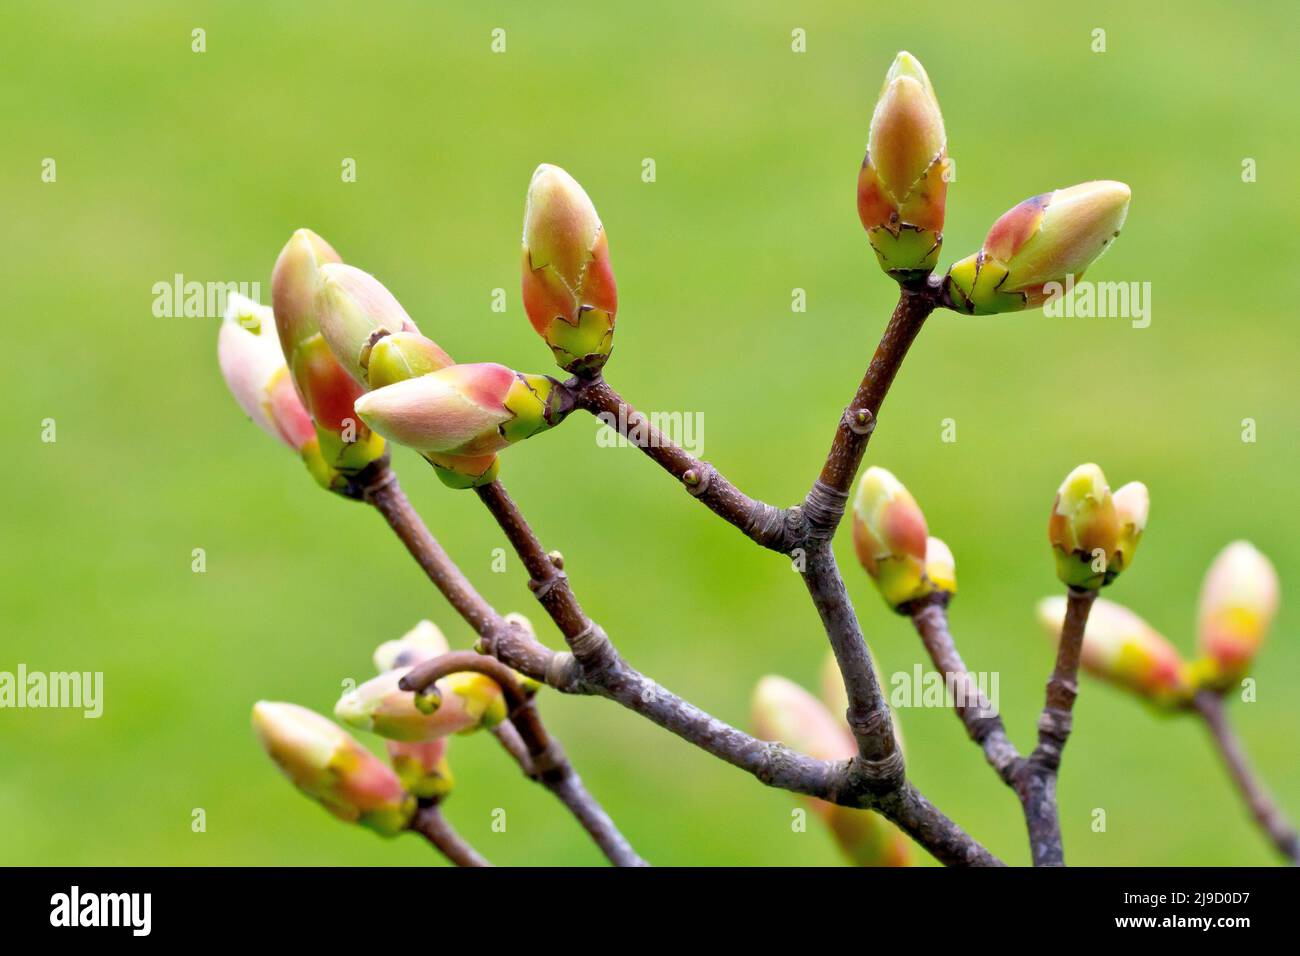 Sycamore (acer pseudoplatanus), close up of several leaf buds on the verge of opening up, isolated against a green background. Stock Photo